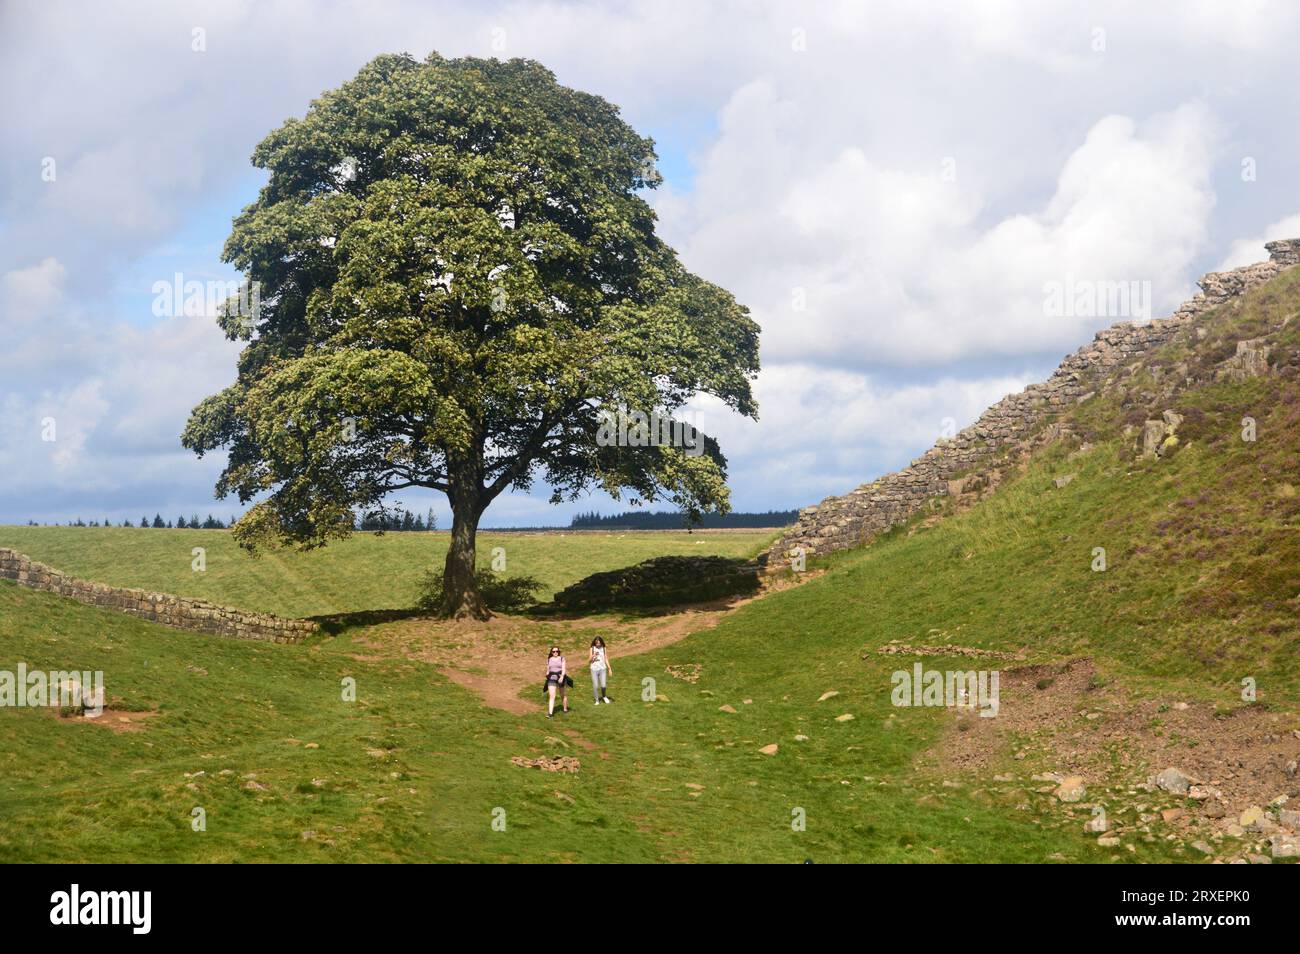 The Sycamore Gap Tree or Robin Hood Tree on Hadrian's Wall Path by Crag Lough near Once Brewed in the Northumberland National Park, England, UK. Stock Photo